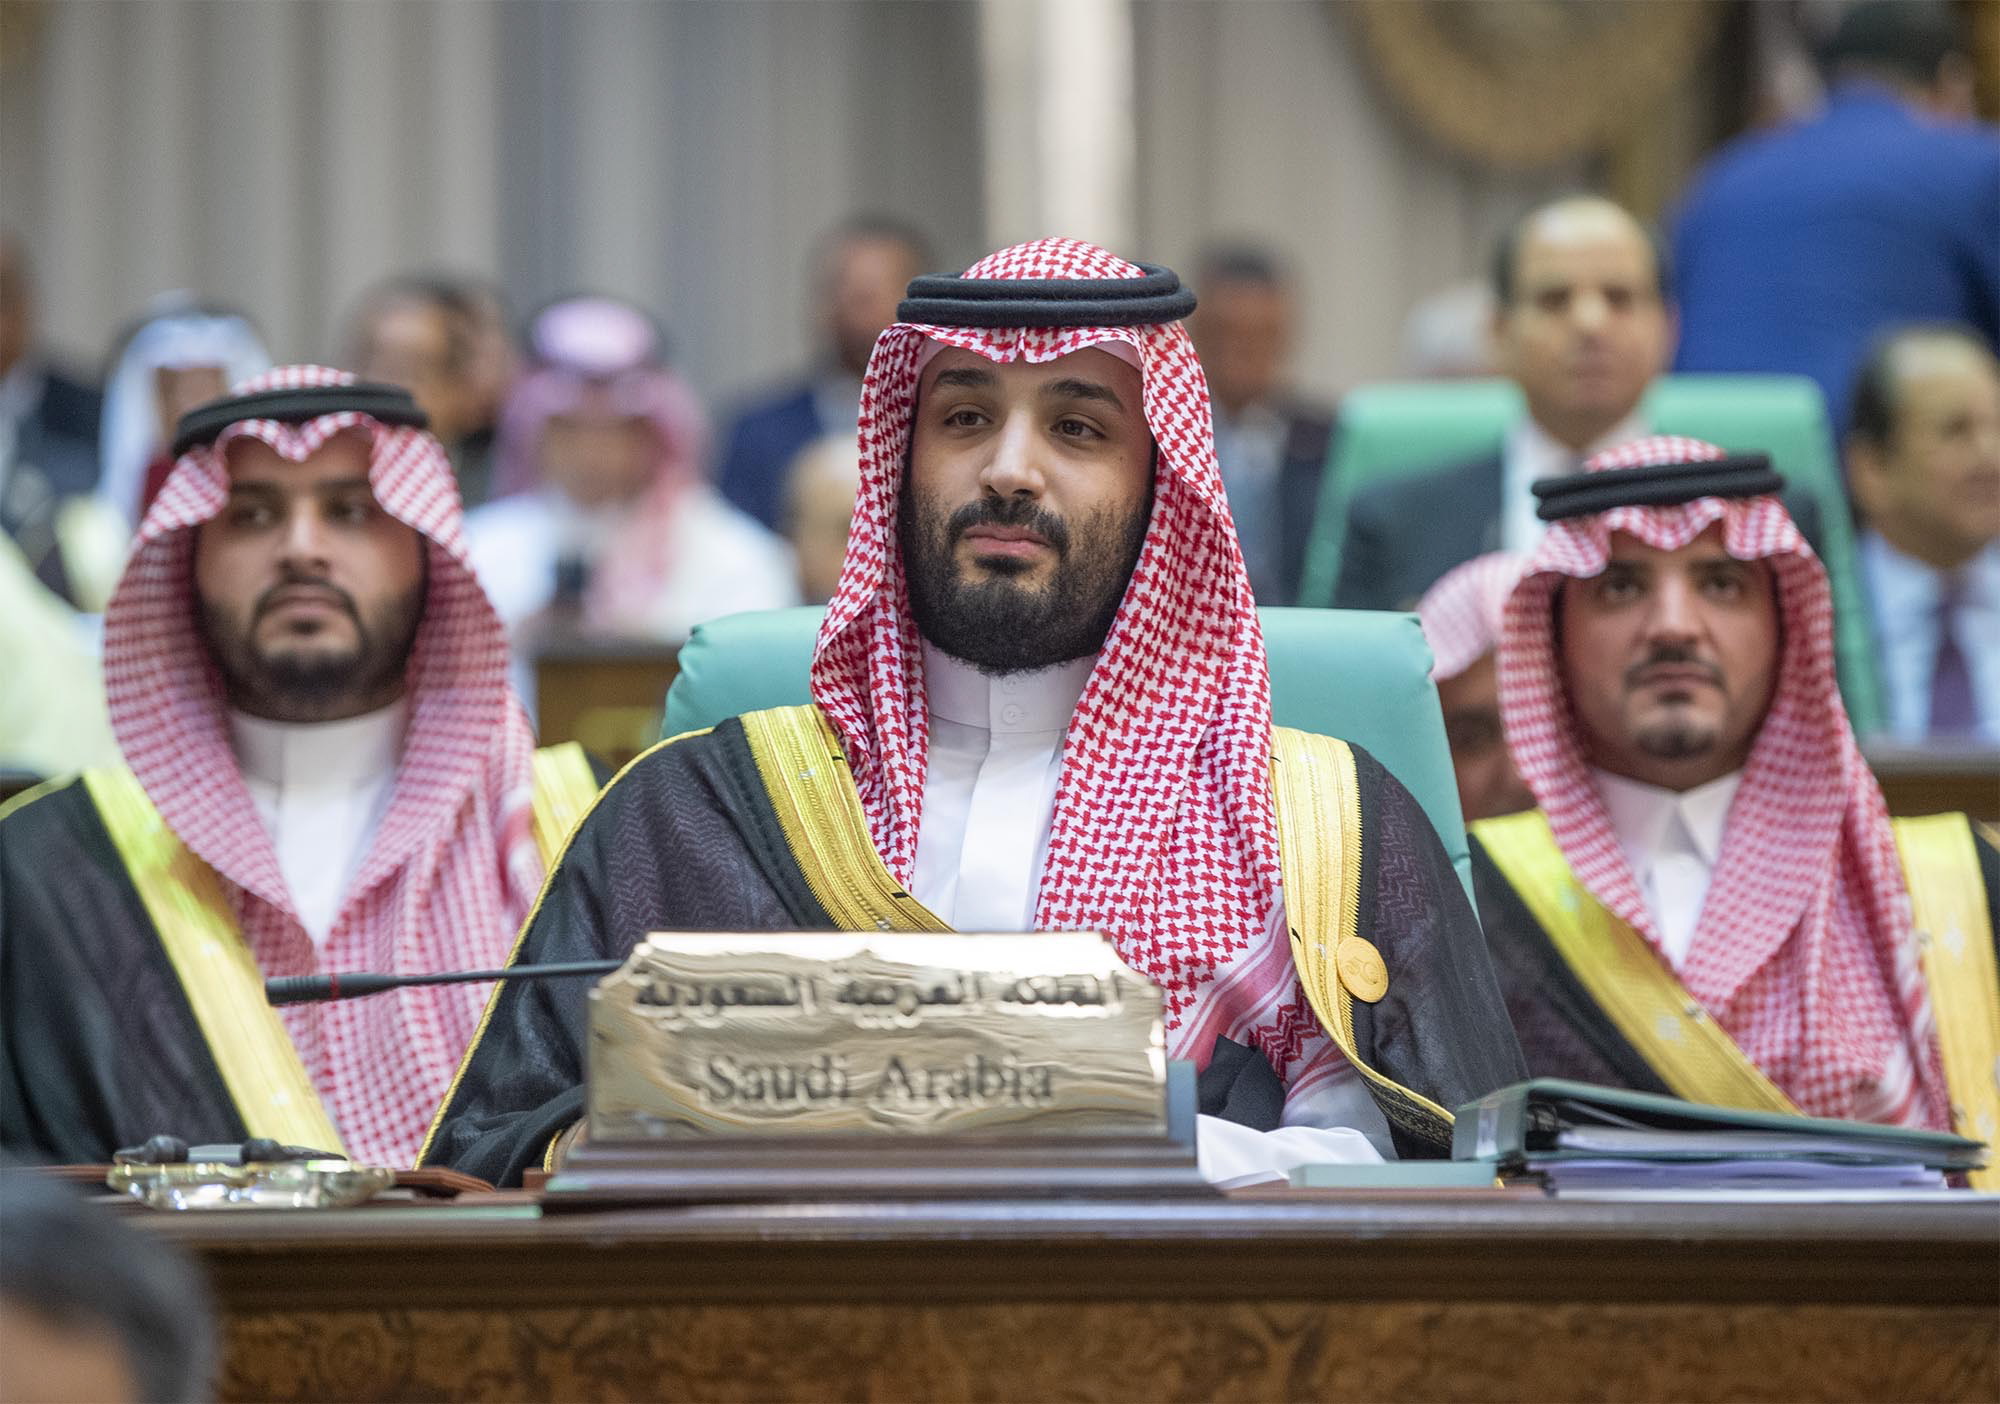 epa07617434 A handout photo made available by the Saudi Royal Court shows Saudi Crown Prince Mohammad bin Salman during the Islamic Summit of the Organization of Islamic Cooperation (OIC) in Mecca, Saudi Arabia, 30 May 2019 (issued on 01 June 2019). Muslim leaders from 57 nations gathered in Mecca to discuss the developments regarding Iran, Palestinian statehood and others. Saudi Arabia's King Salman slammed Iran over recent attacks on Saudi and Emirates oil ships describing the incidents in a speech as "terrorist acts"  and "grave danger" endanger international energy supplies.  EPA/Bandar al-Galoud / Saudi Royal Palace HANDOUT HANDOUT EDITORIAL USE ONLY/NO SALES HANDOUT EDITORIAL USE ONLY/NO SALES